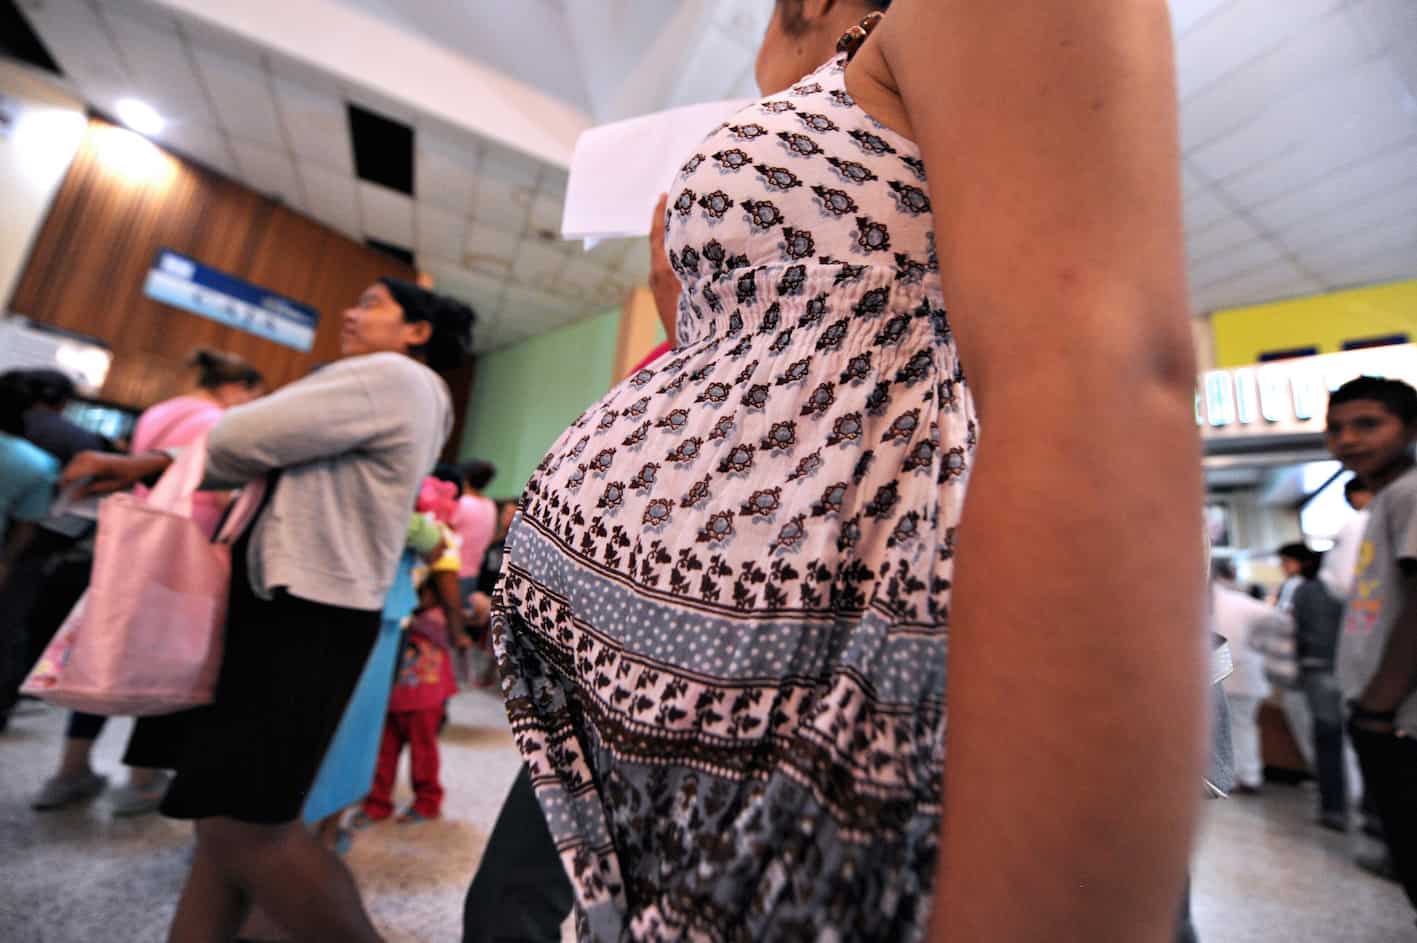 For illustrative purposes only. Pregnant women wait to be attended at the Maternal and Children's Hospital in Tegucigalpa, Honduras in 2016.